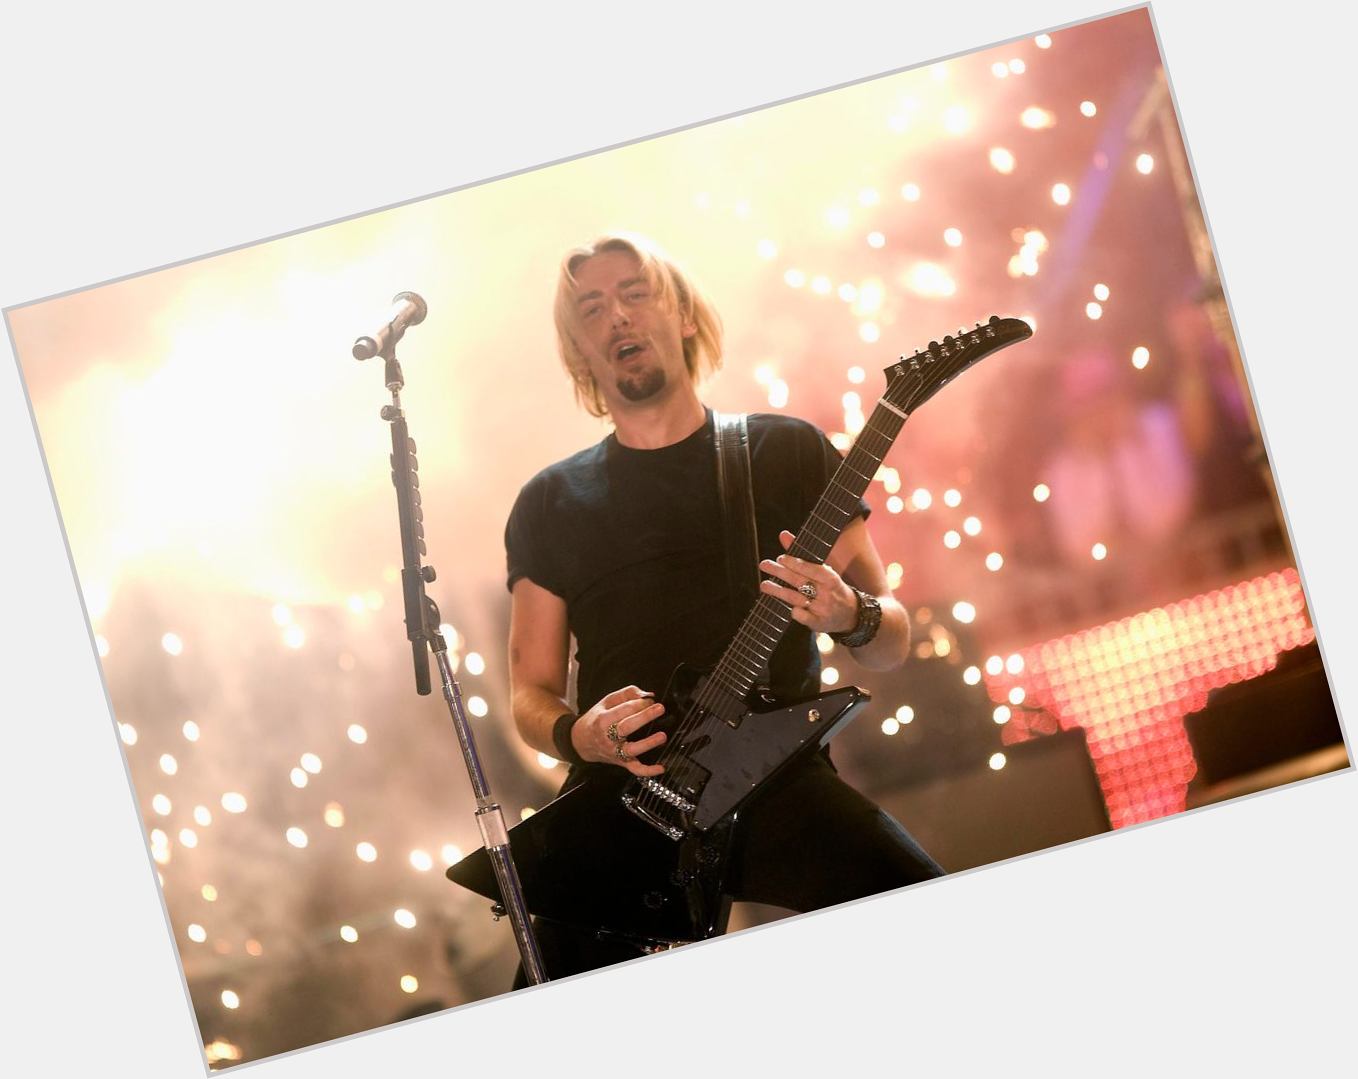 Wishing a happy 45th birthday to frontman Chad Kroeger!    